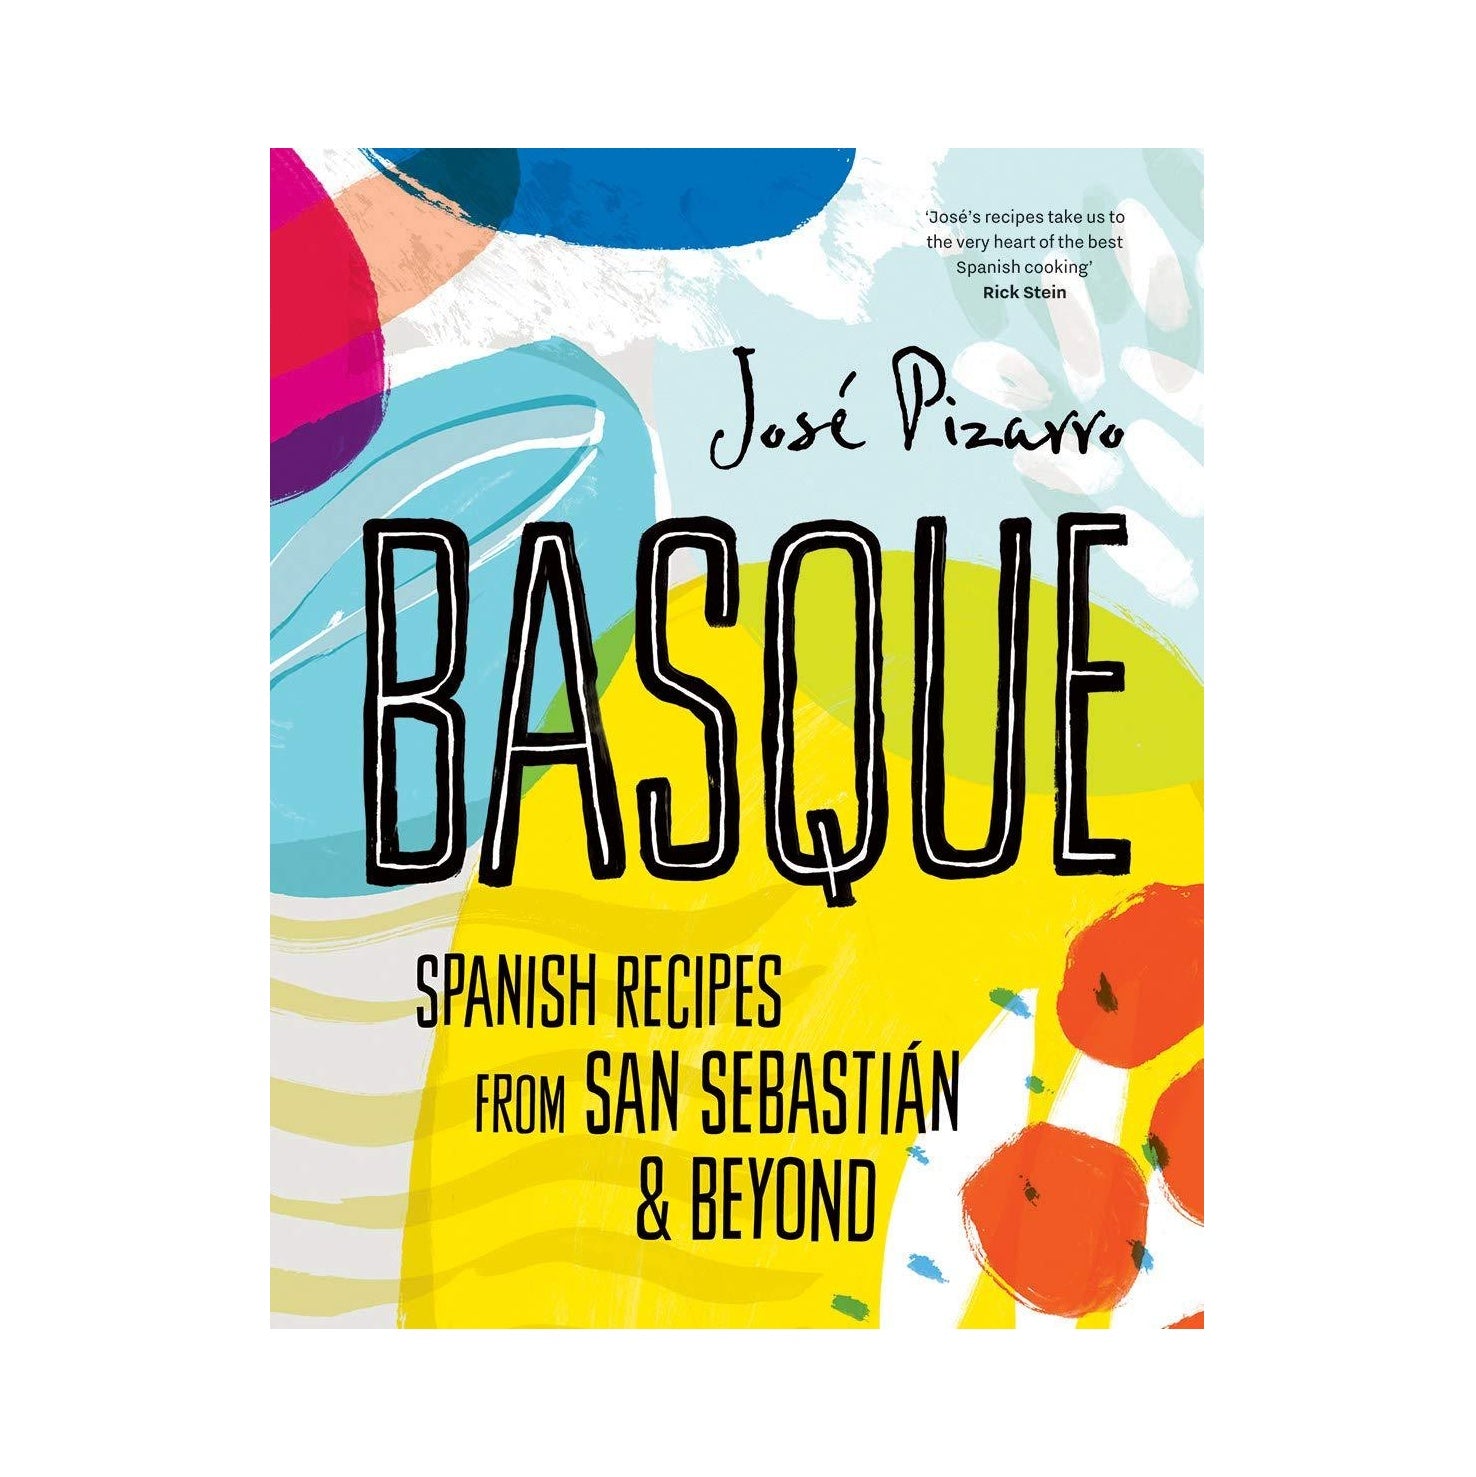 Basque (Compact Edition) Spanish Recipes from San Sebastian and Beyond